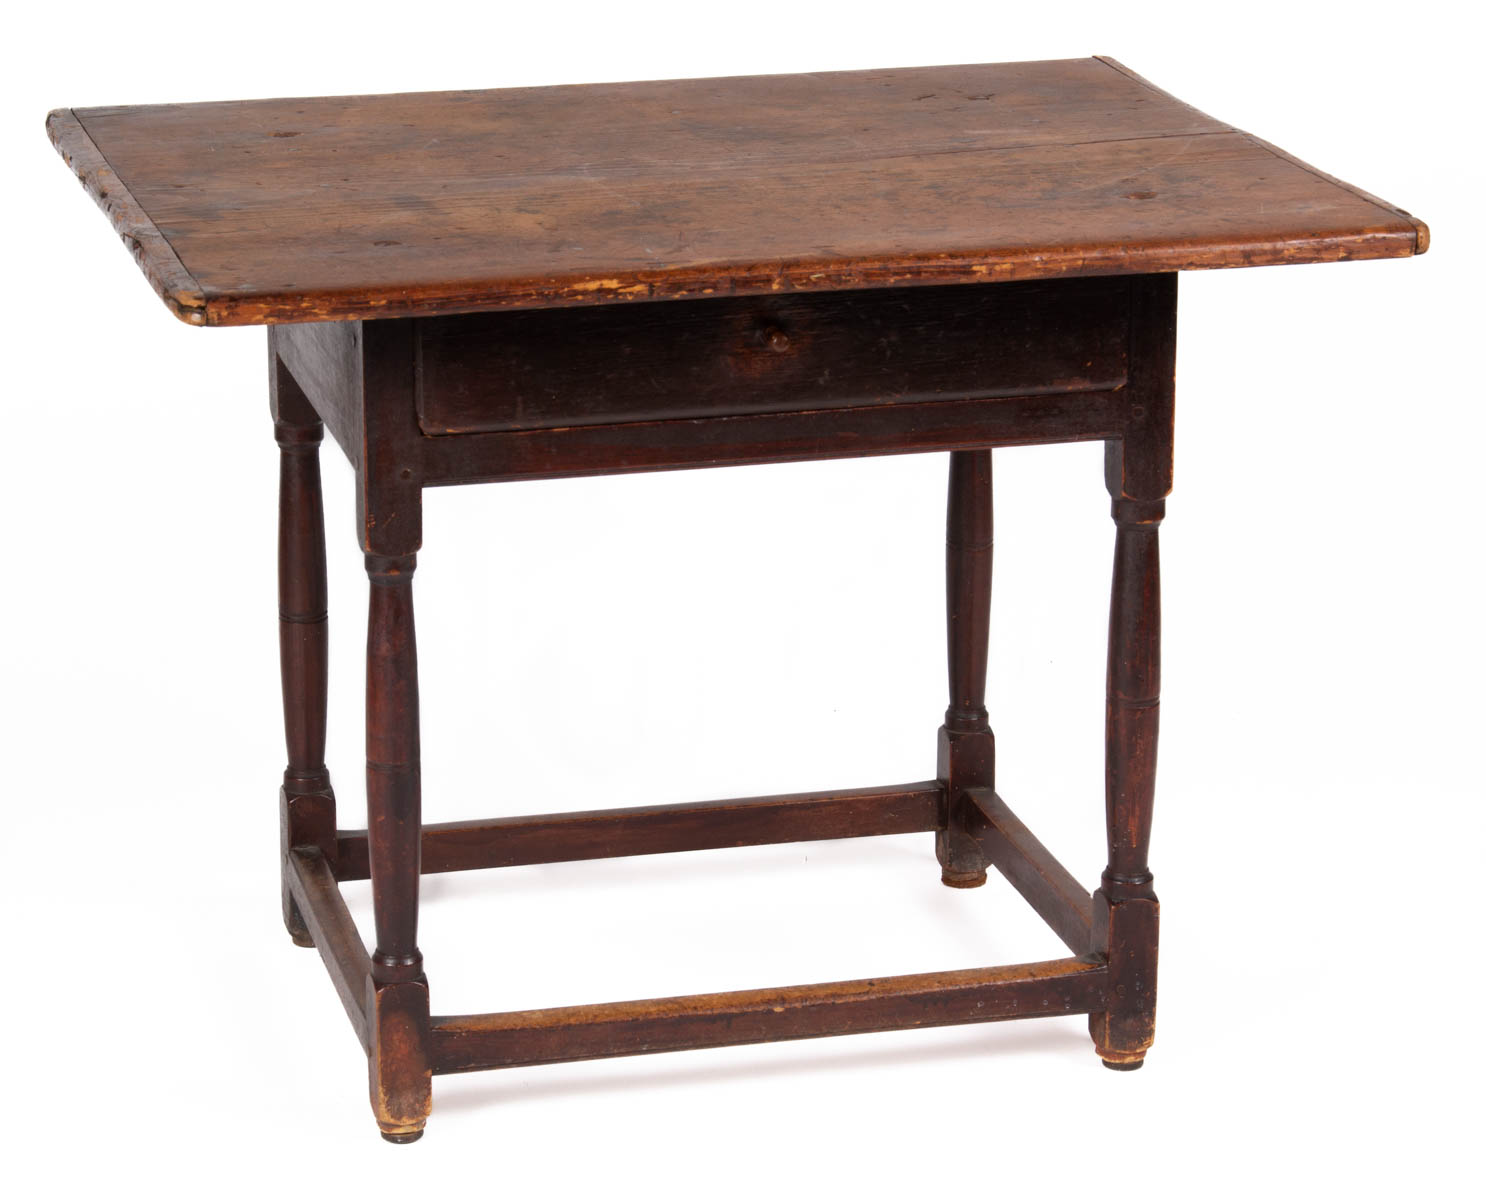 NEW ENGLAND PAINTED PINE TAVERN / WORK TABLE